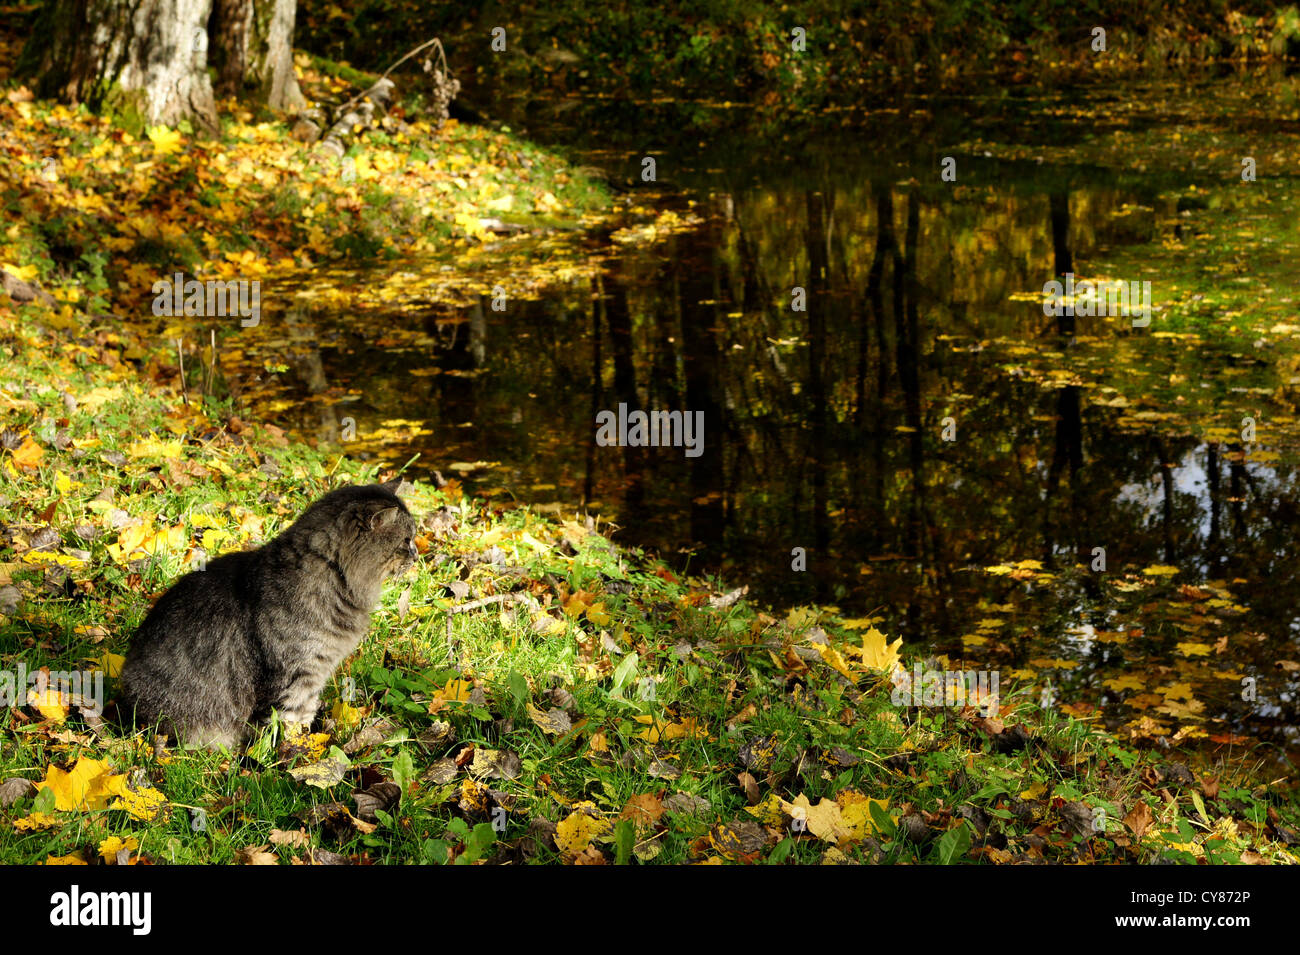 The grey cat sits on coast of a pond Stock Photo